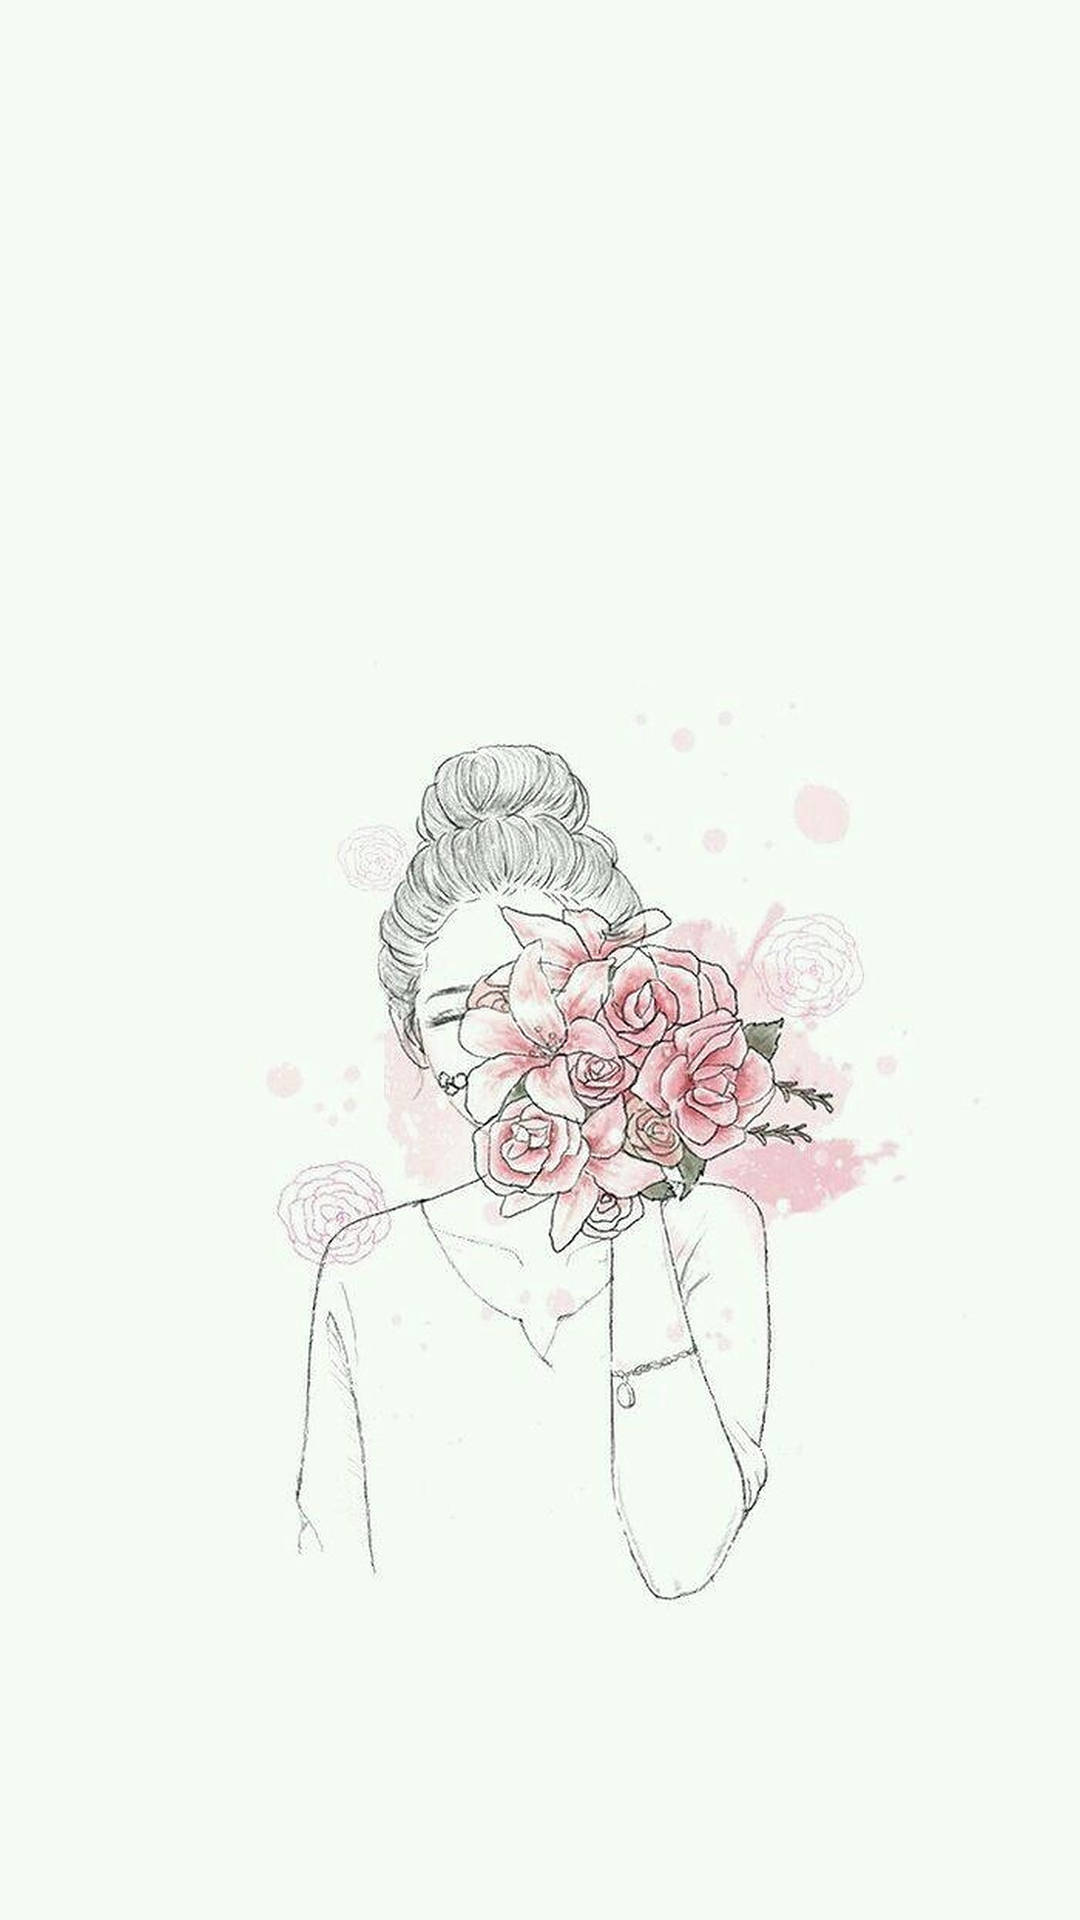 Aesthetic Girl With Pink Flowers Wallpaper